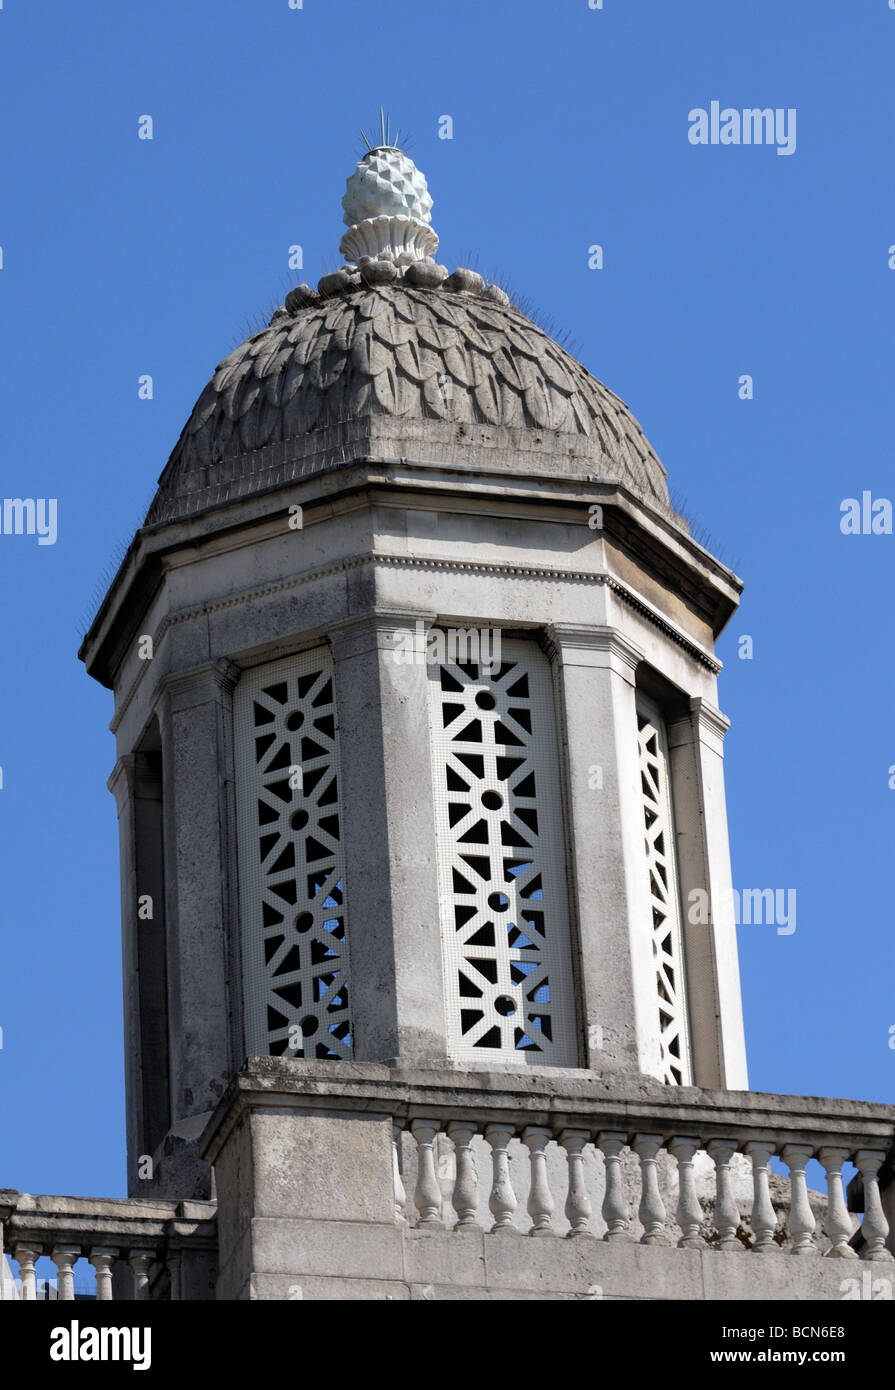 A lead roofed cupola  above the entrance to the National Gallery Trafalgar Square, London, England, UK Stock Photo